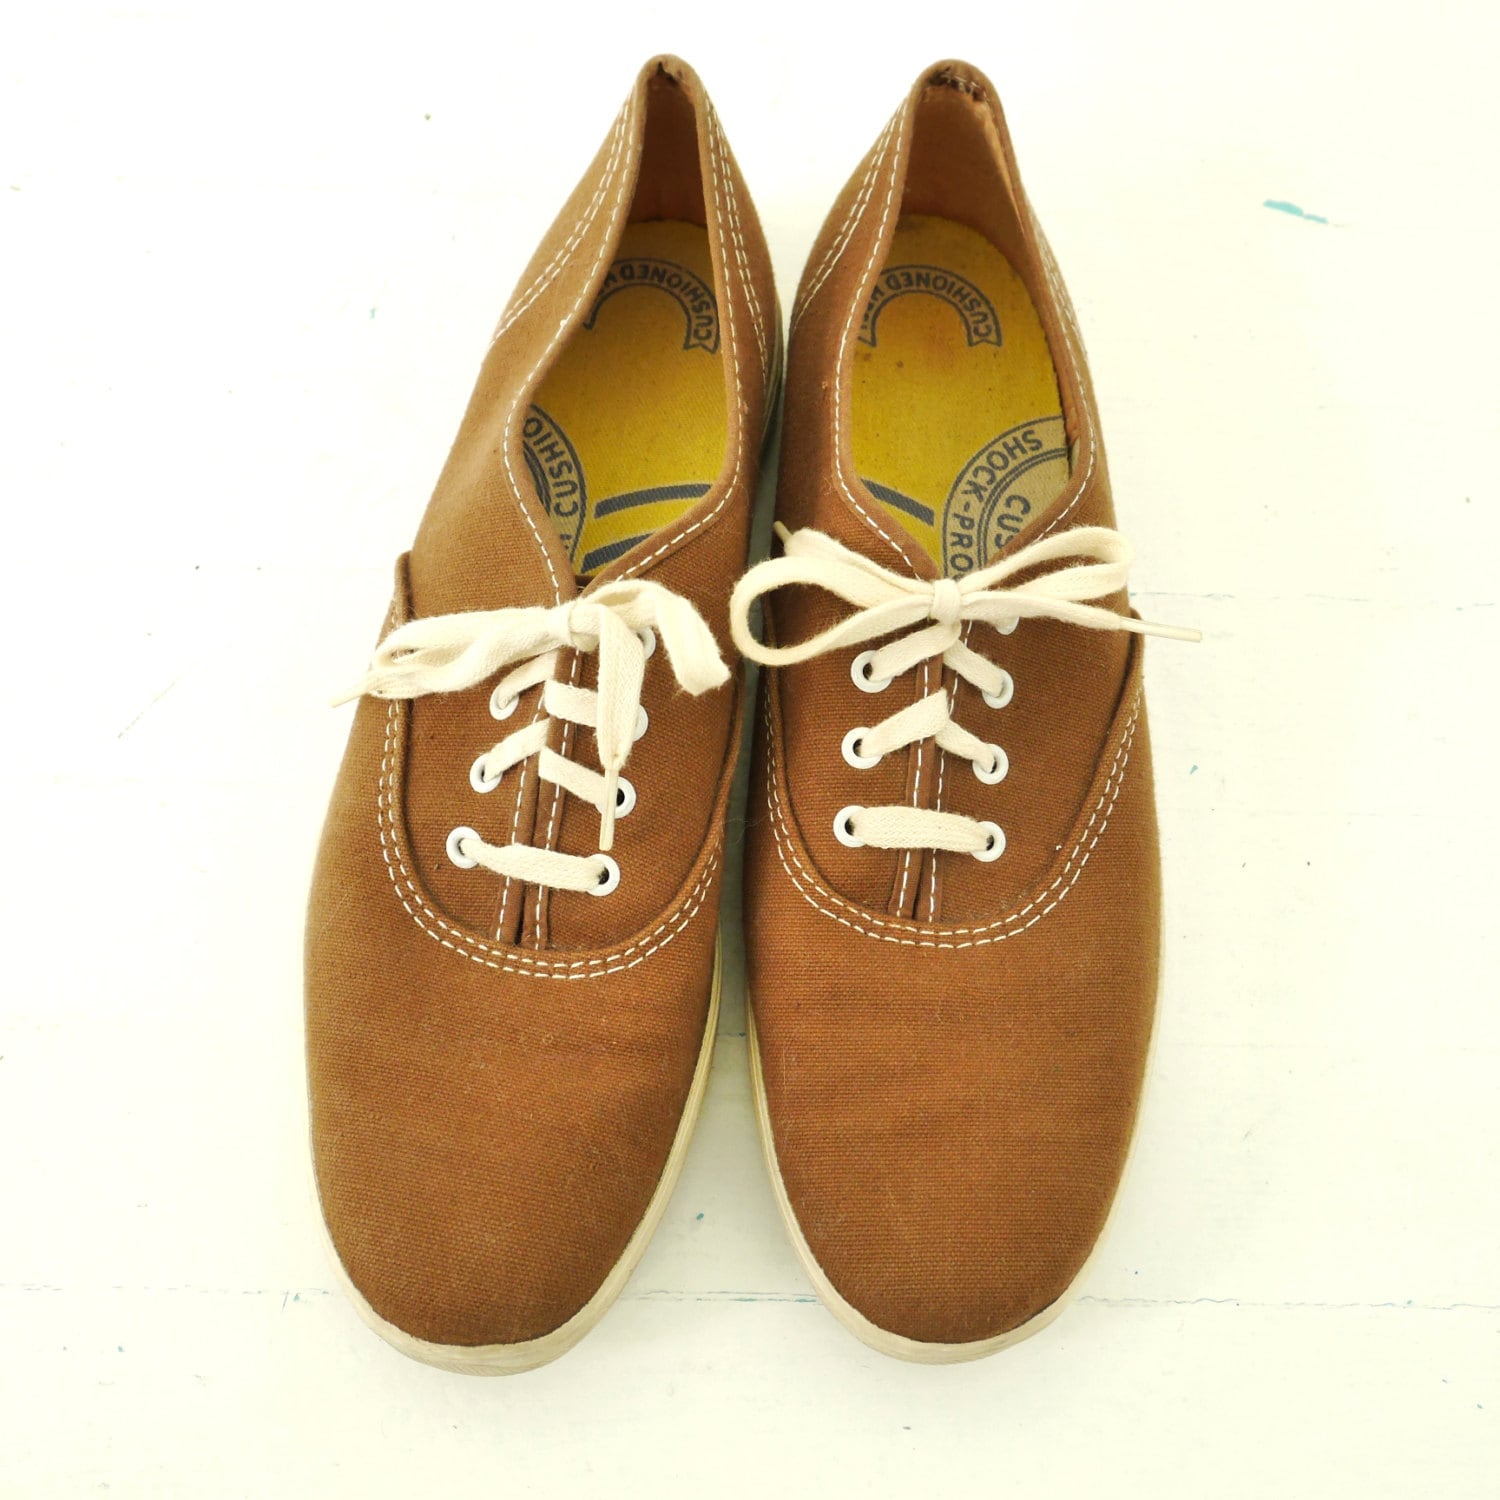 Vintage 70s Keds Brown Canvas Shoes Womens by WelcomeHomeVintage